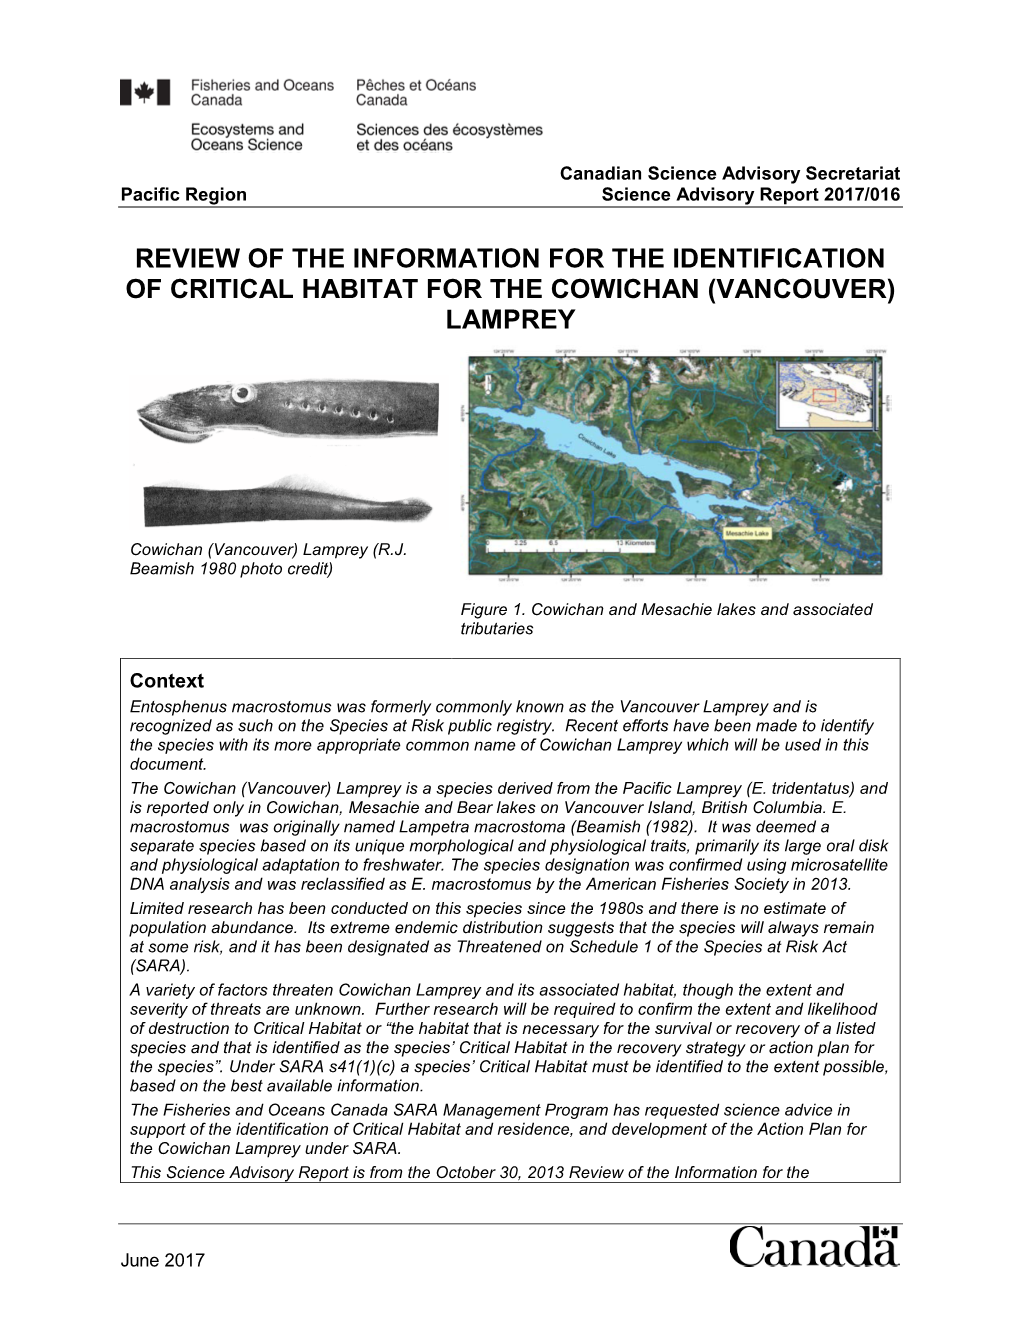 Review of the Information for the Identification of Critical Habitat for the Cowichan (Vancouver) Lamprey